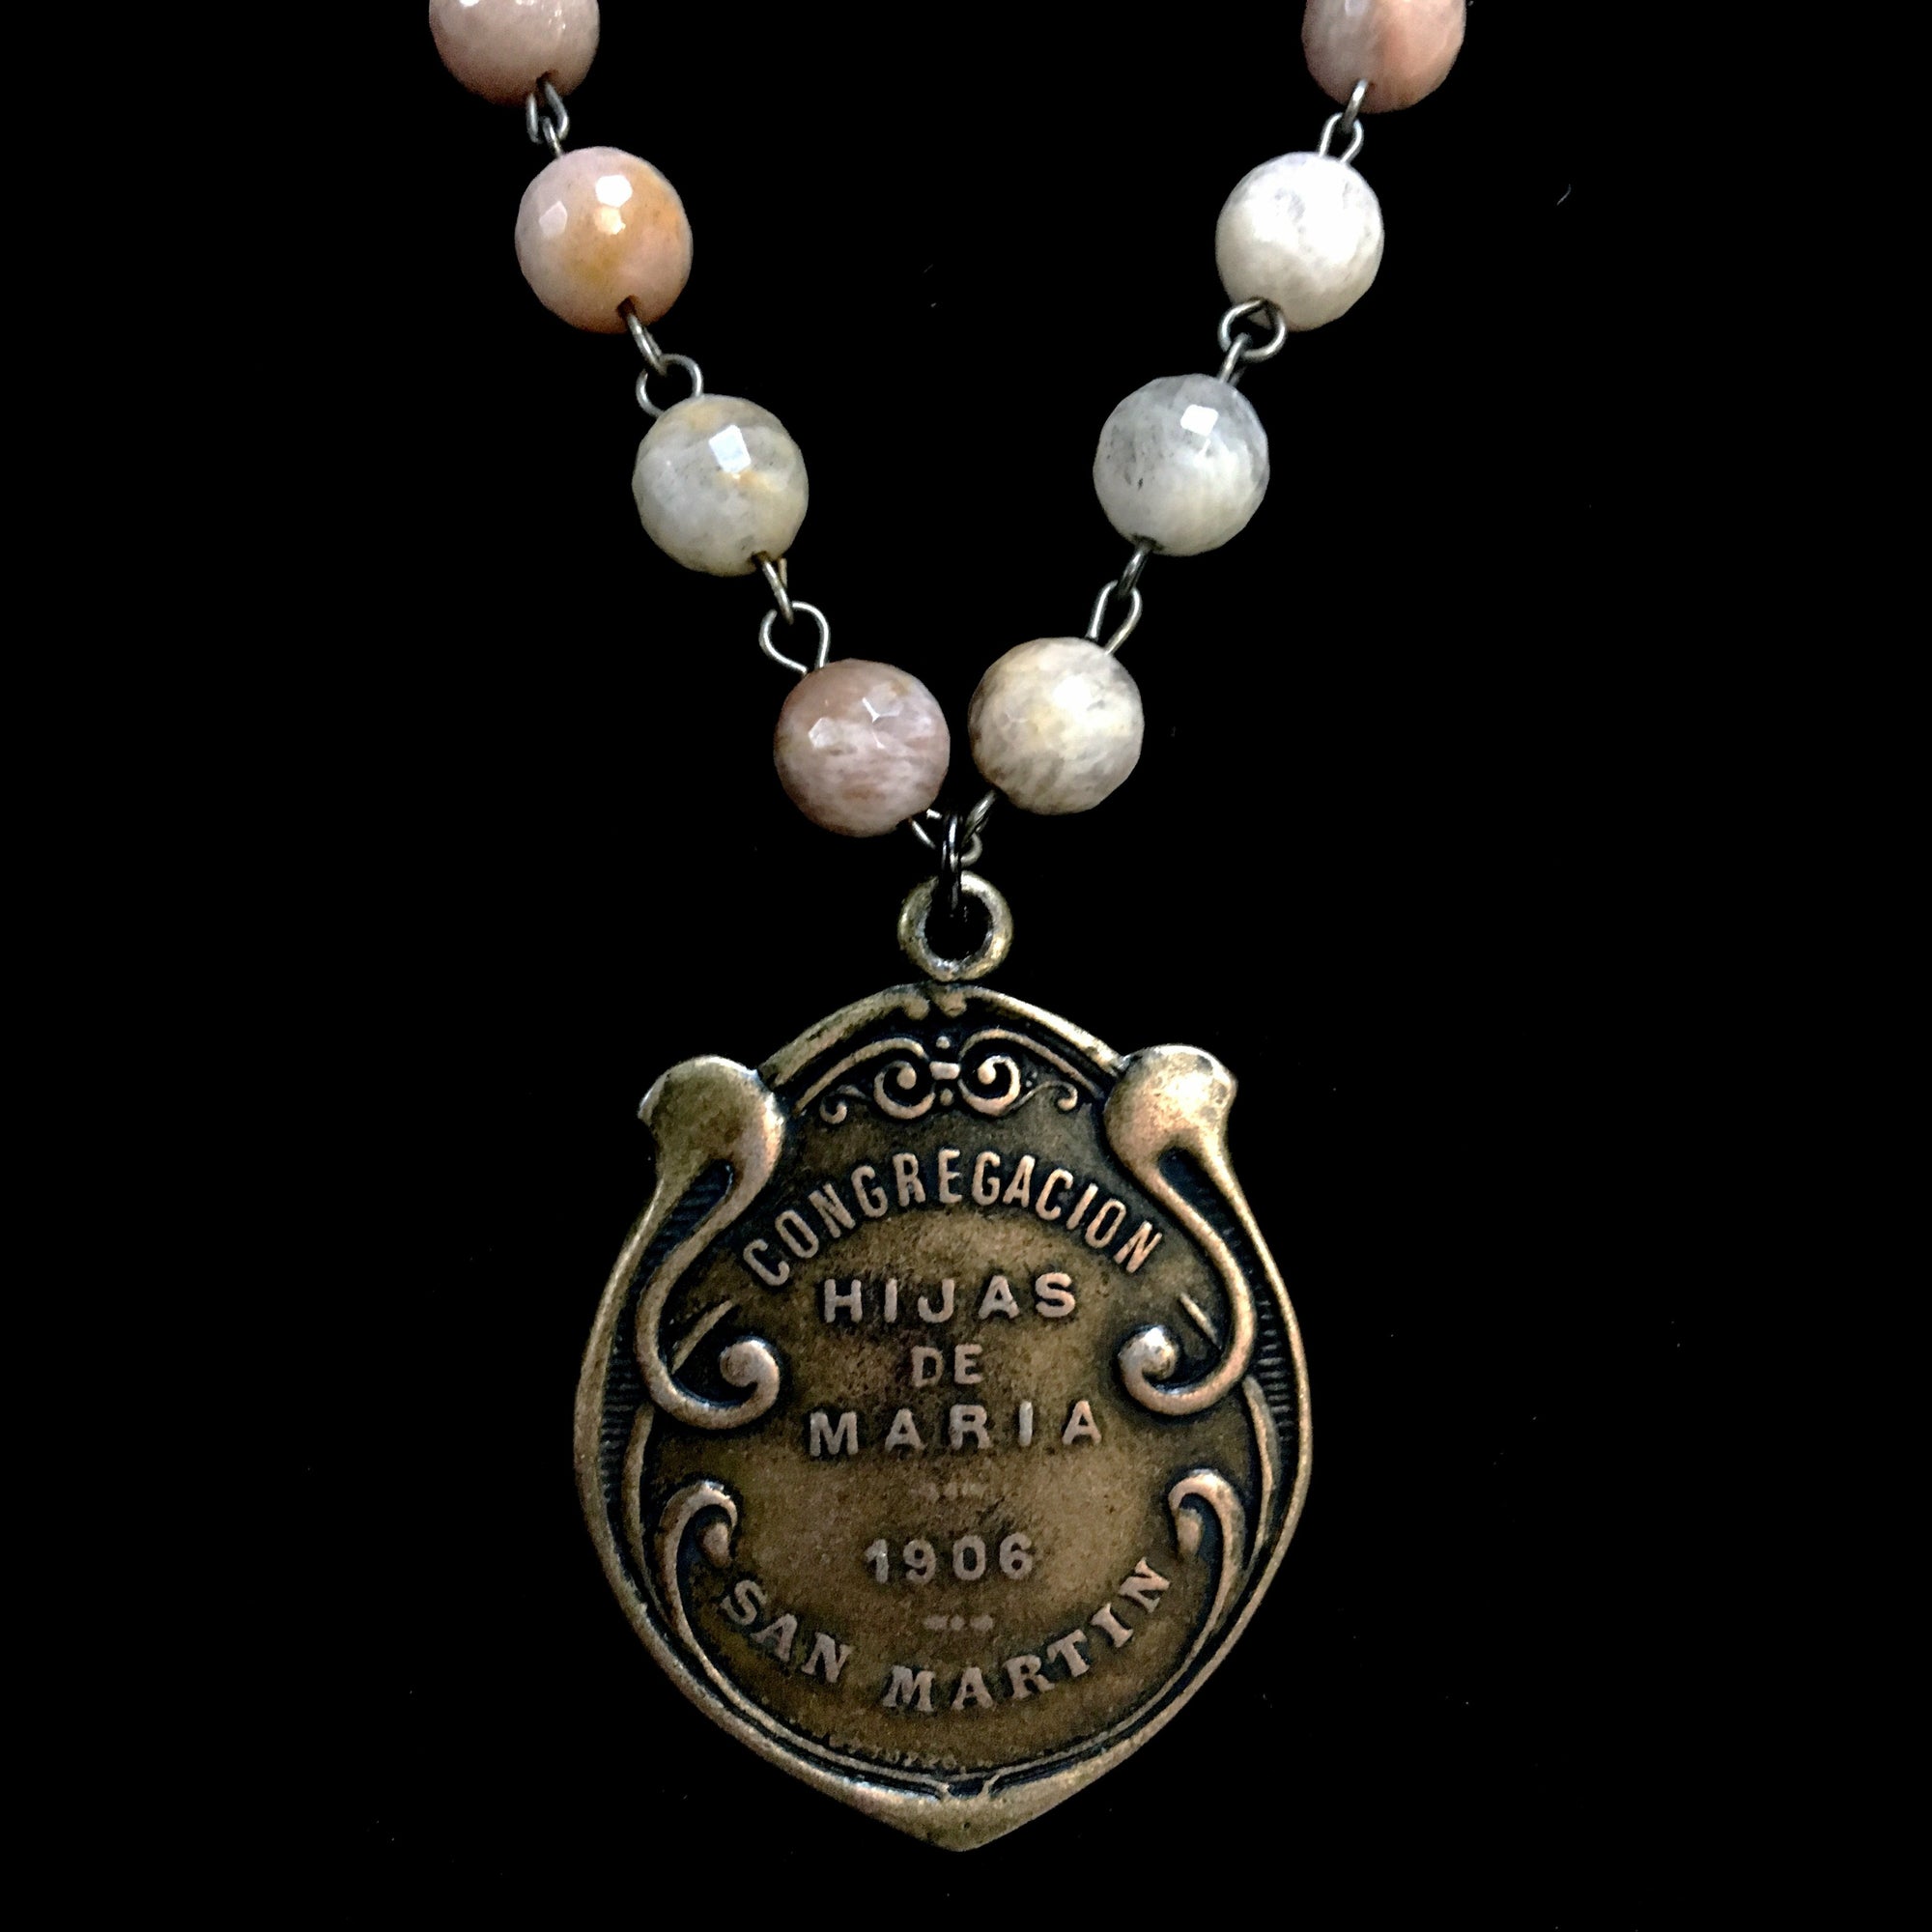 One of a Kind Moonstone Dream Madonna Necklace by Whispering Goddess